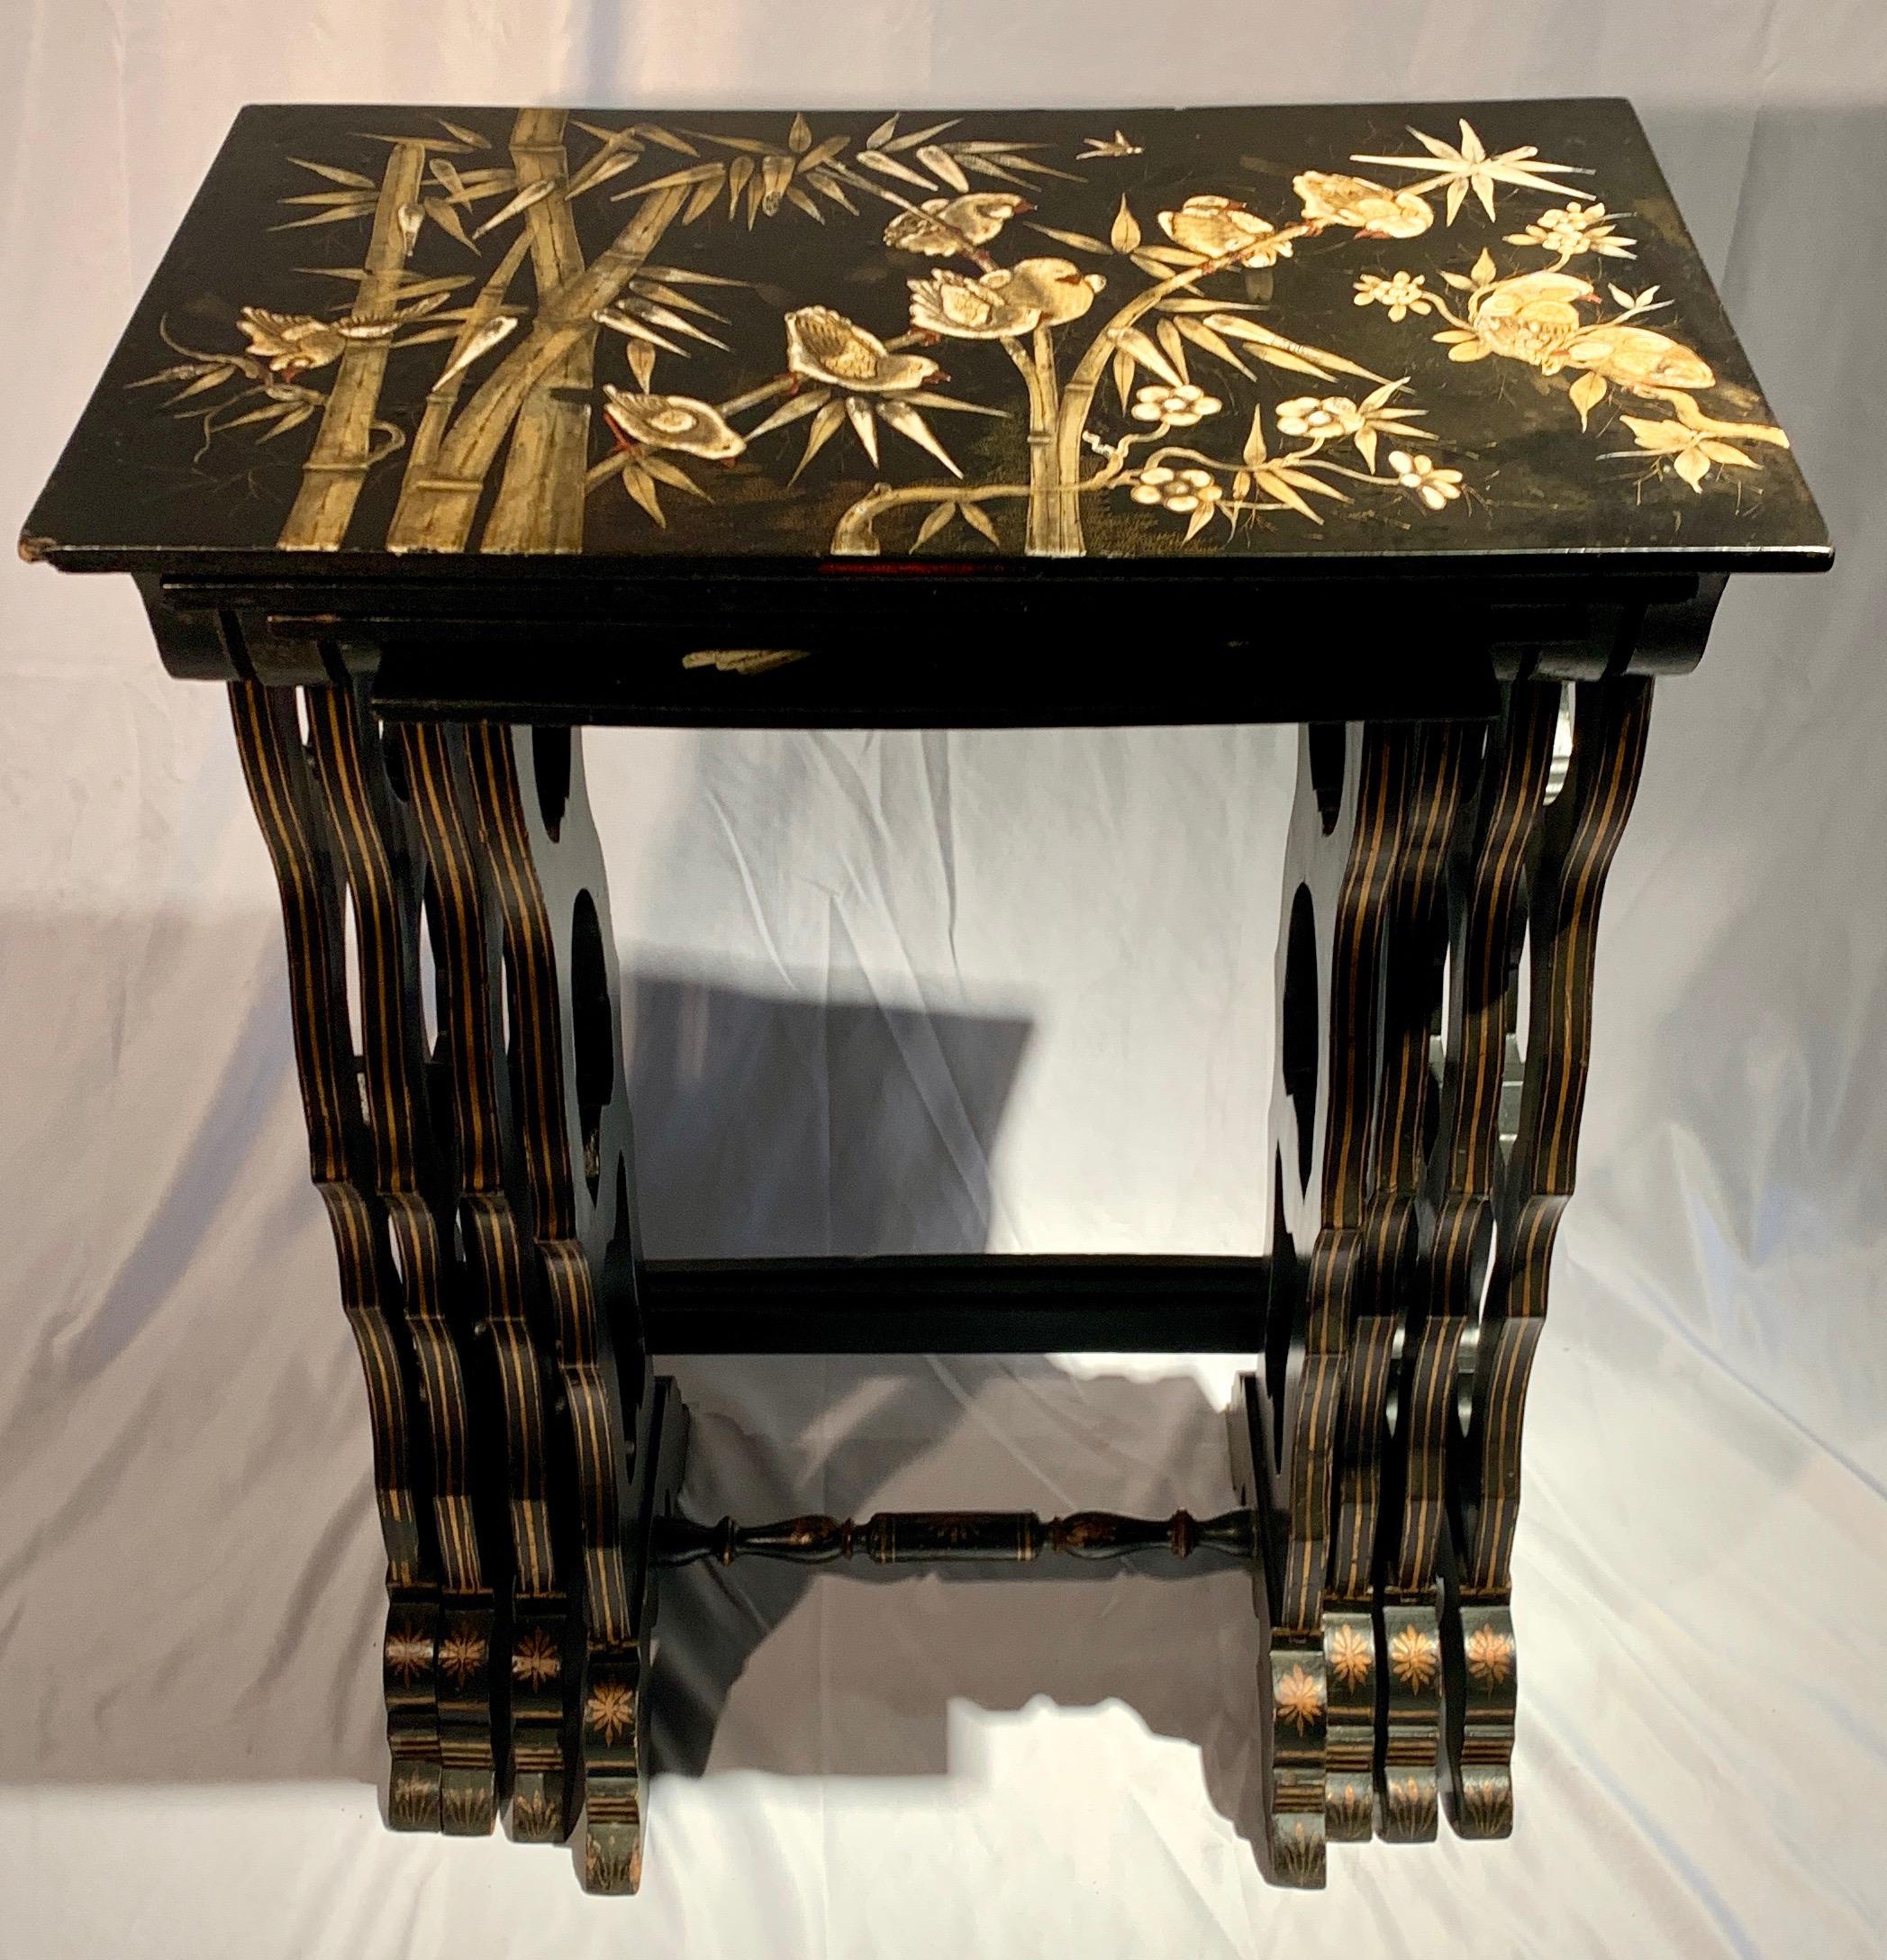 These are wonderfully decorated nesting tables. The tallest stands 30 inches high, 23 /12 inches wide and 14 1/2 inches deep.
The shortest stands 27 1/2 inches high, 15 1/4 inches wide and 12 1/2 inches deep.
Each table top of the four has a